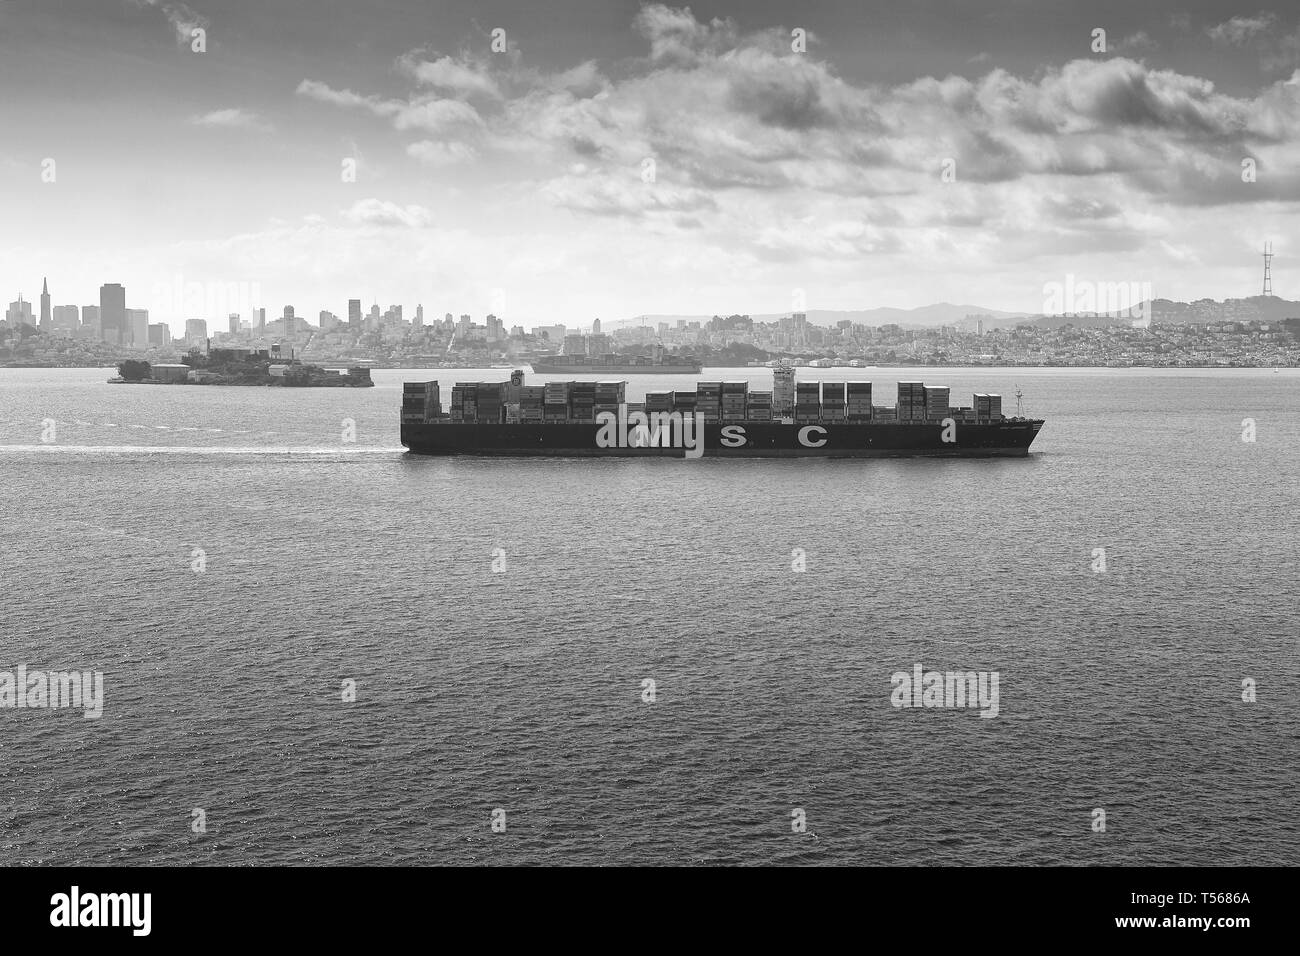 Moody Black And White Photo Of The Container Ship, MSC ARIANE, Steaming Through San Francisco Bay, Alcatraz To The Left And Behind. USA. Stock Photo